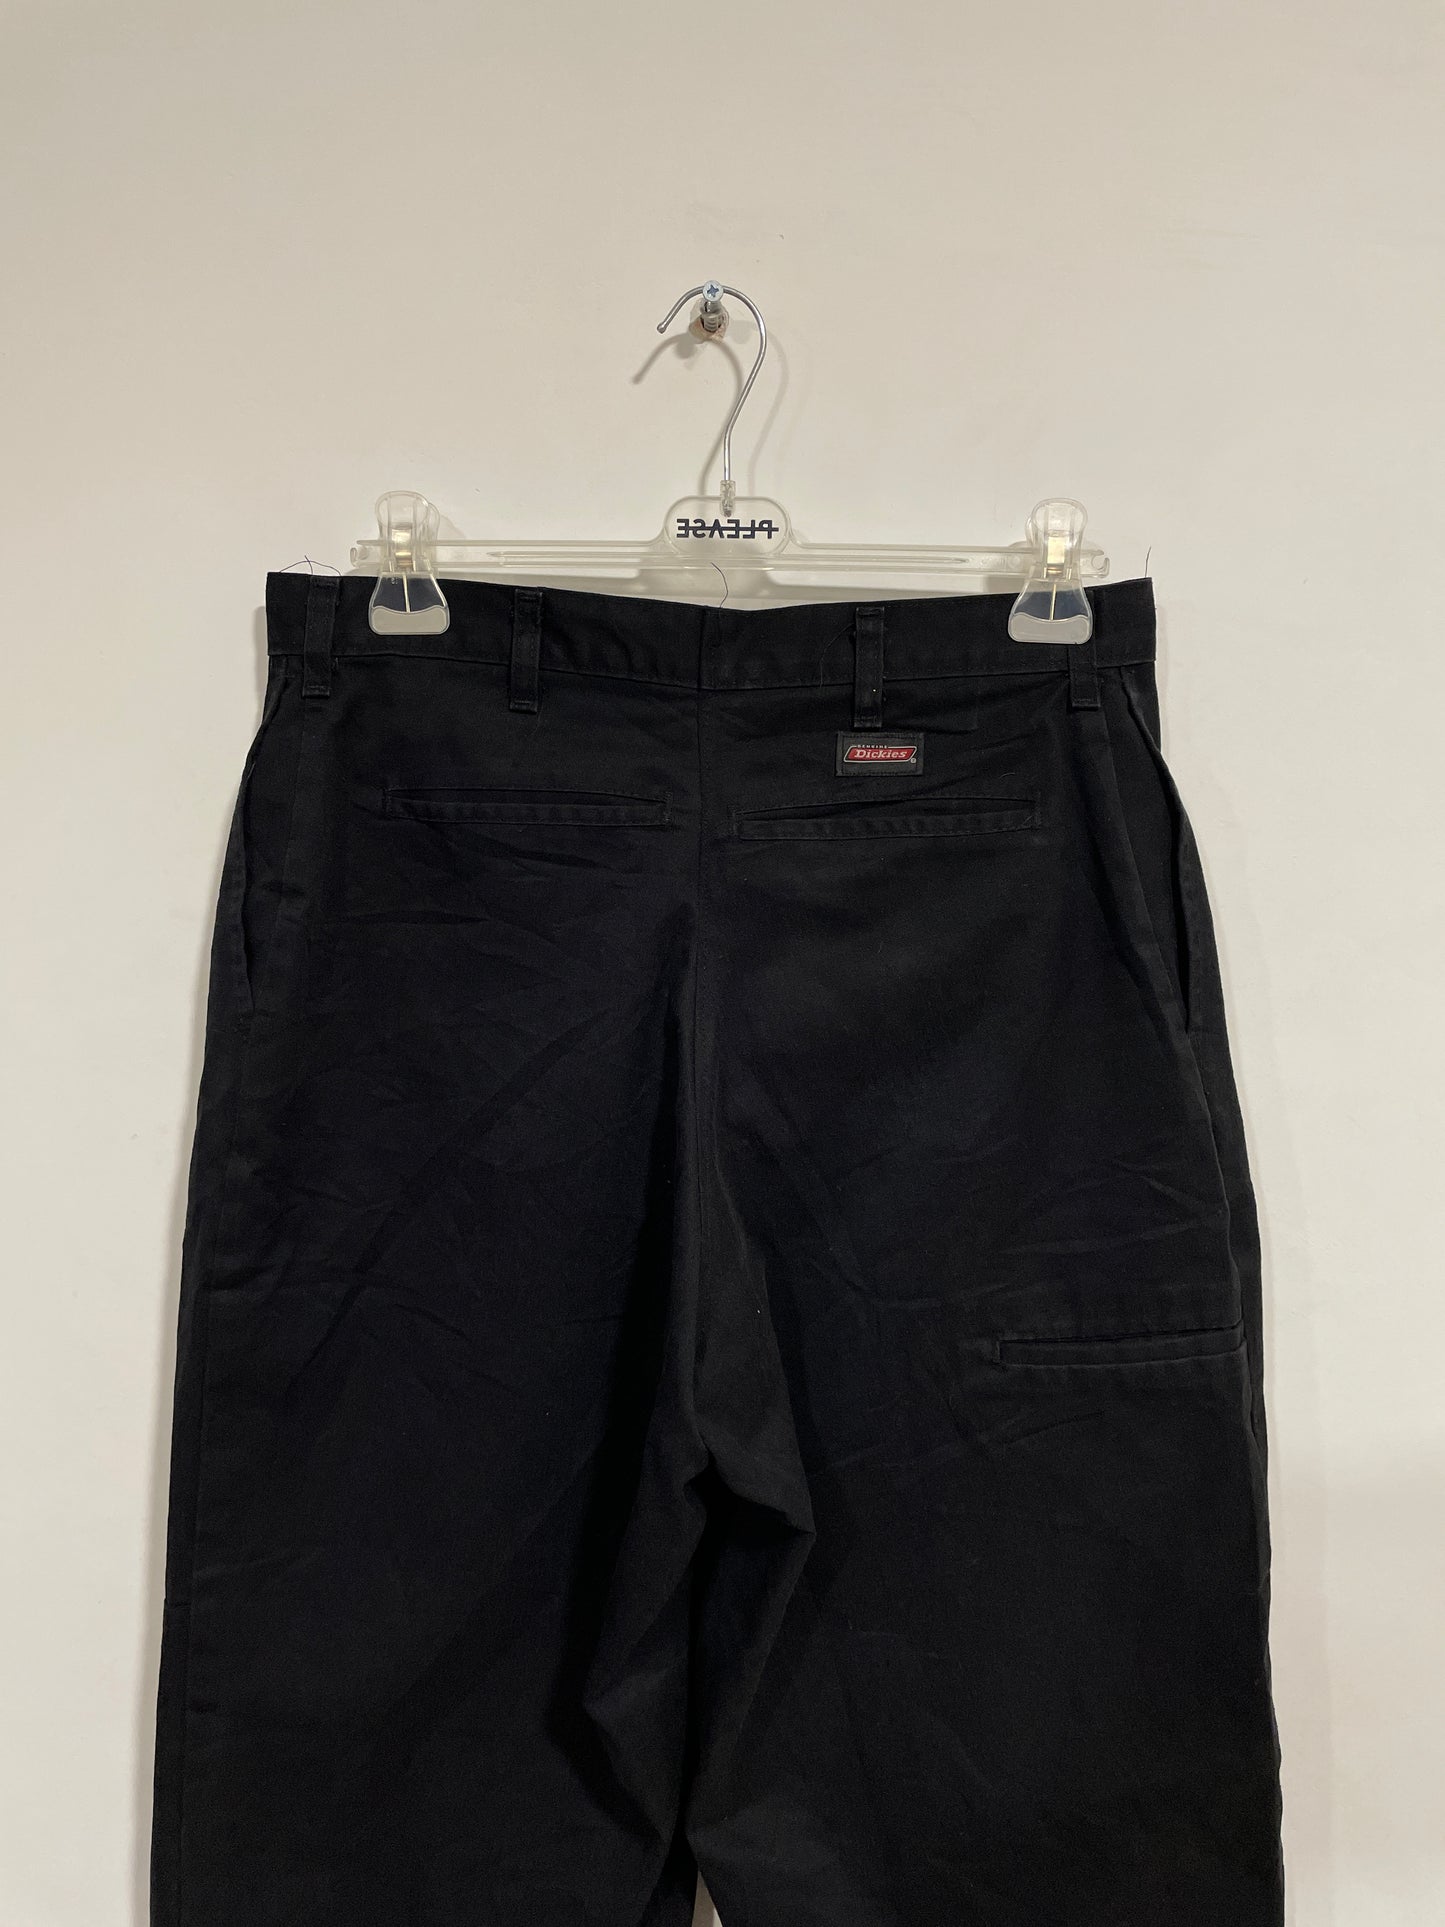 Dickies double knee pant (A598)